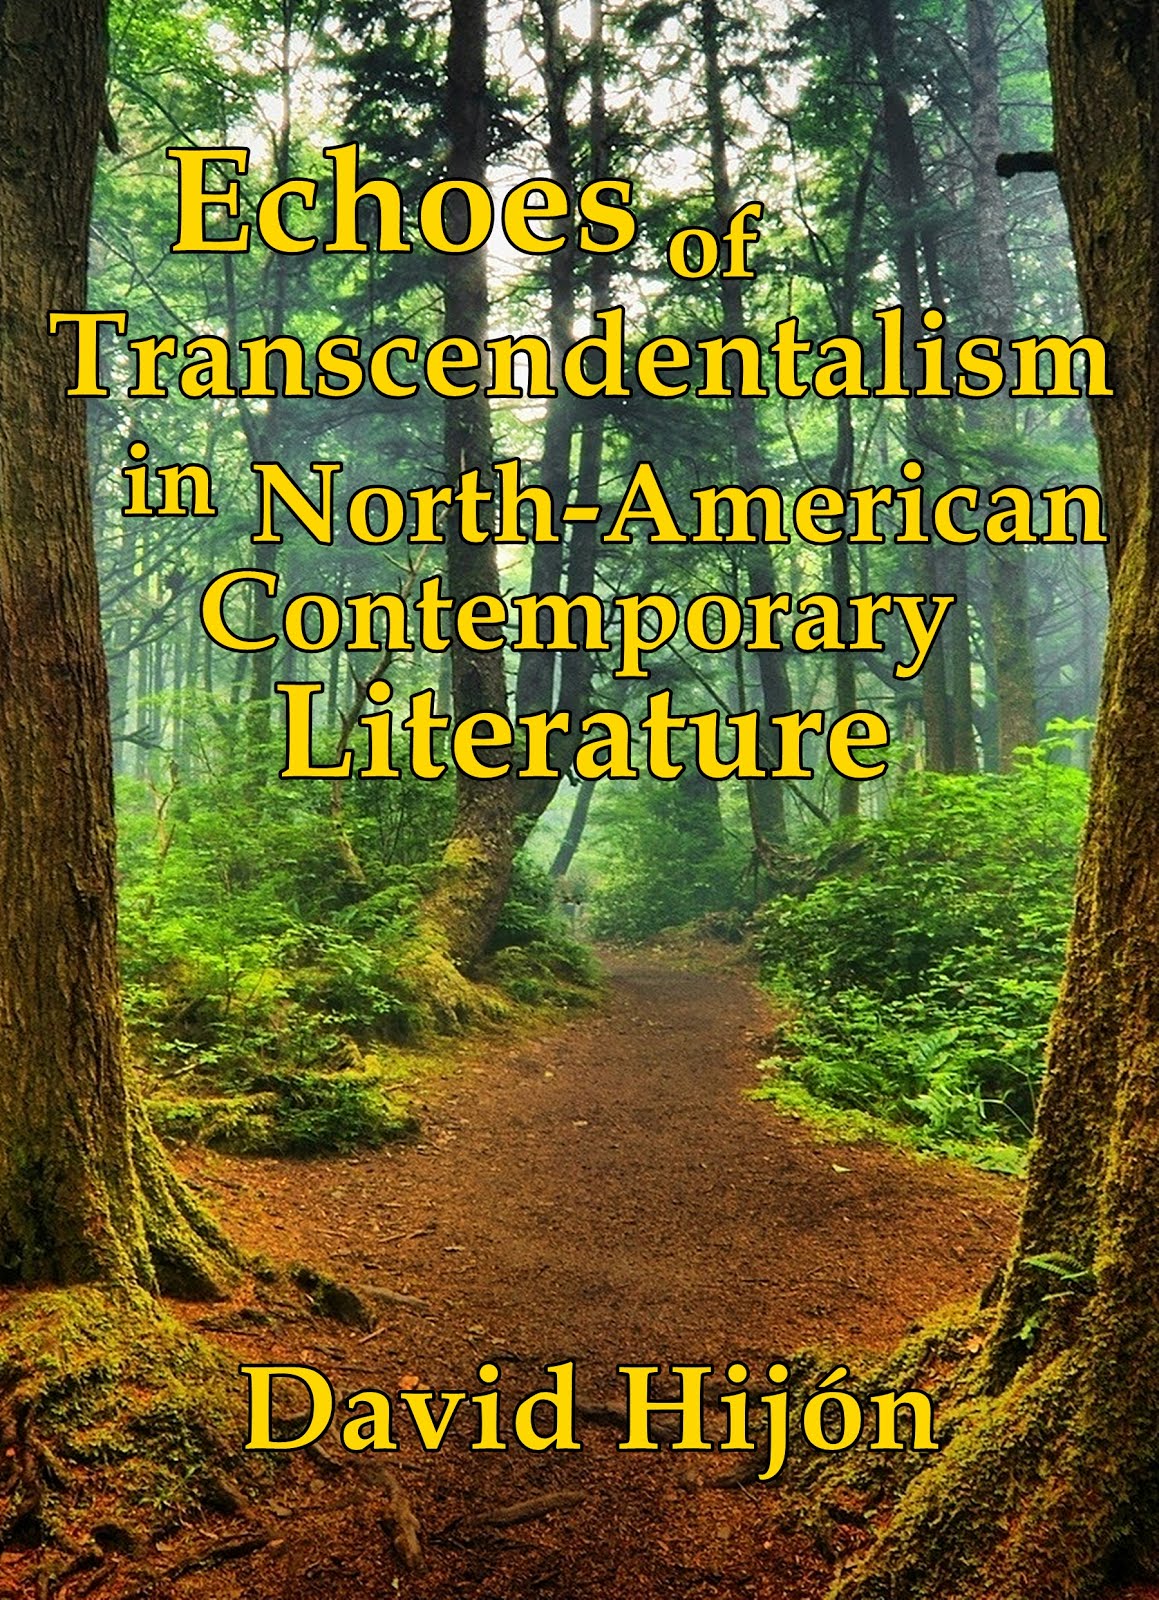 Echoes of Transcendentalism in North-American Contemporary Literature